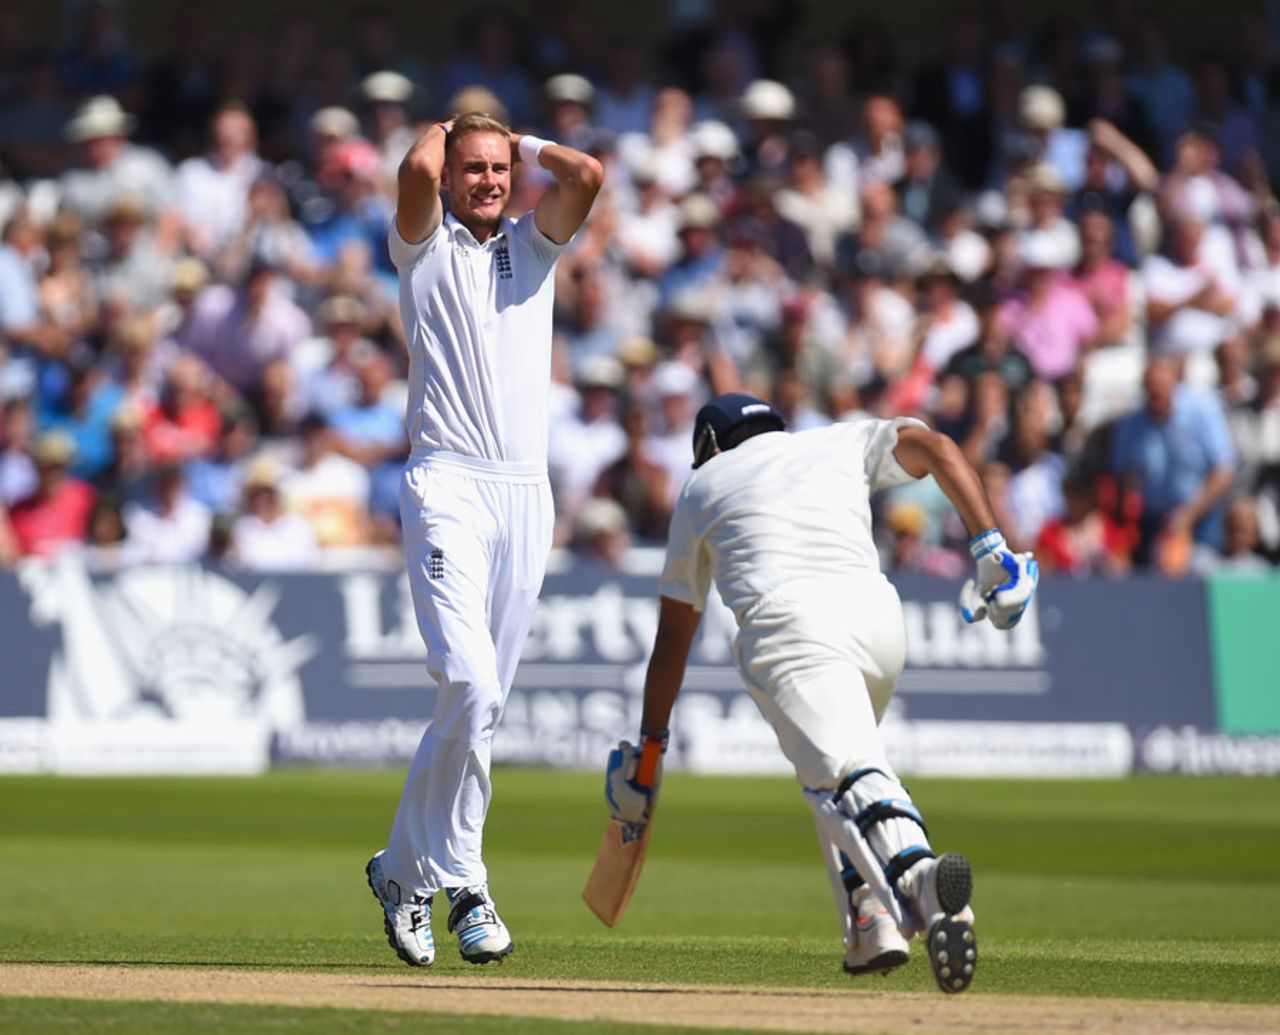 Stuart Broad reacts after a dropped catch from Matt Prior, England v India, 1st Investec Test, Trent Bridge, 2nd day, July 10, 2014